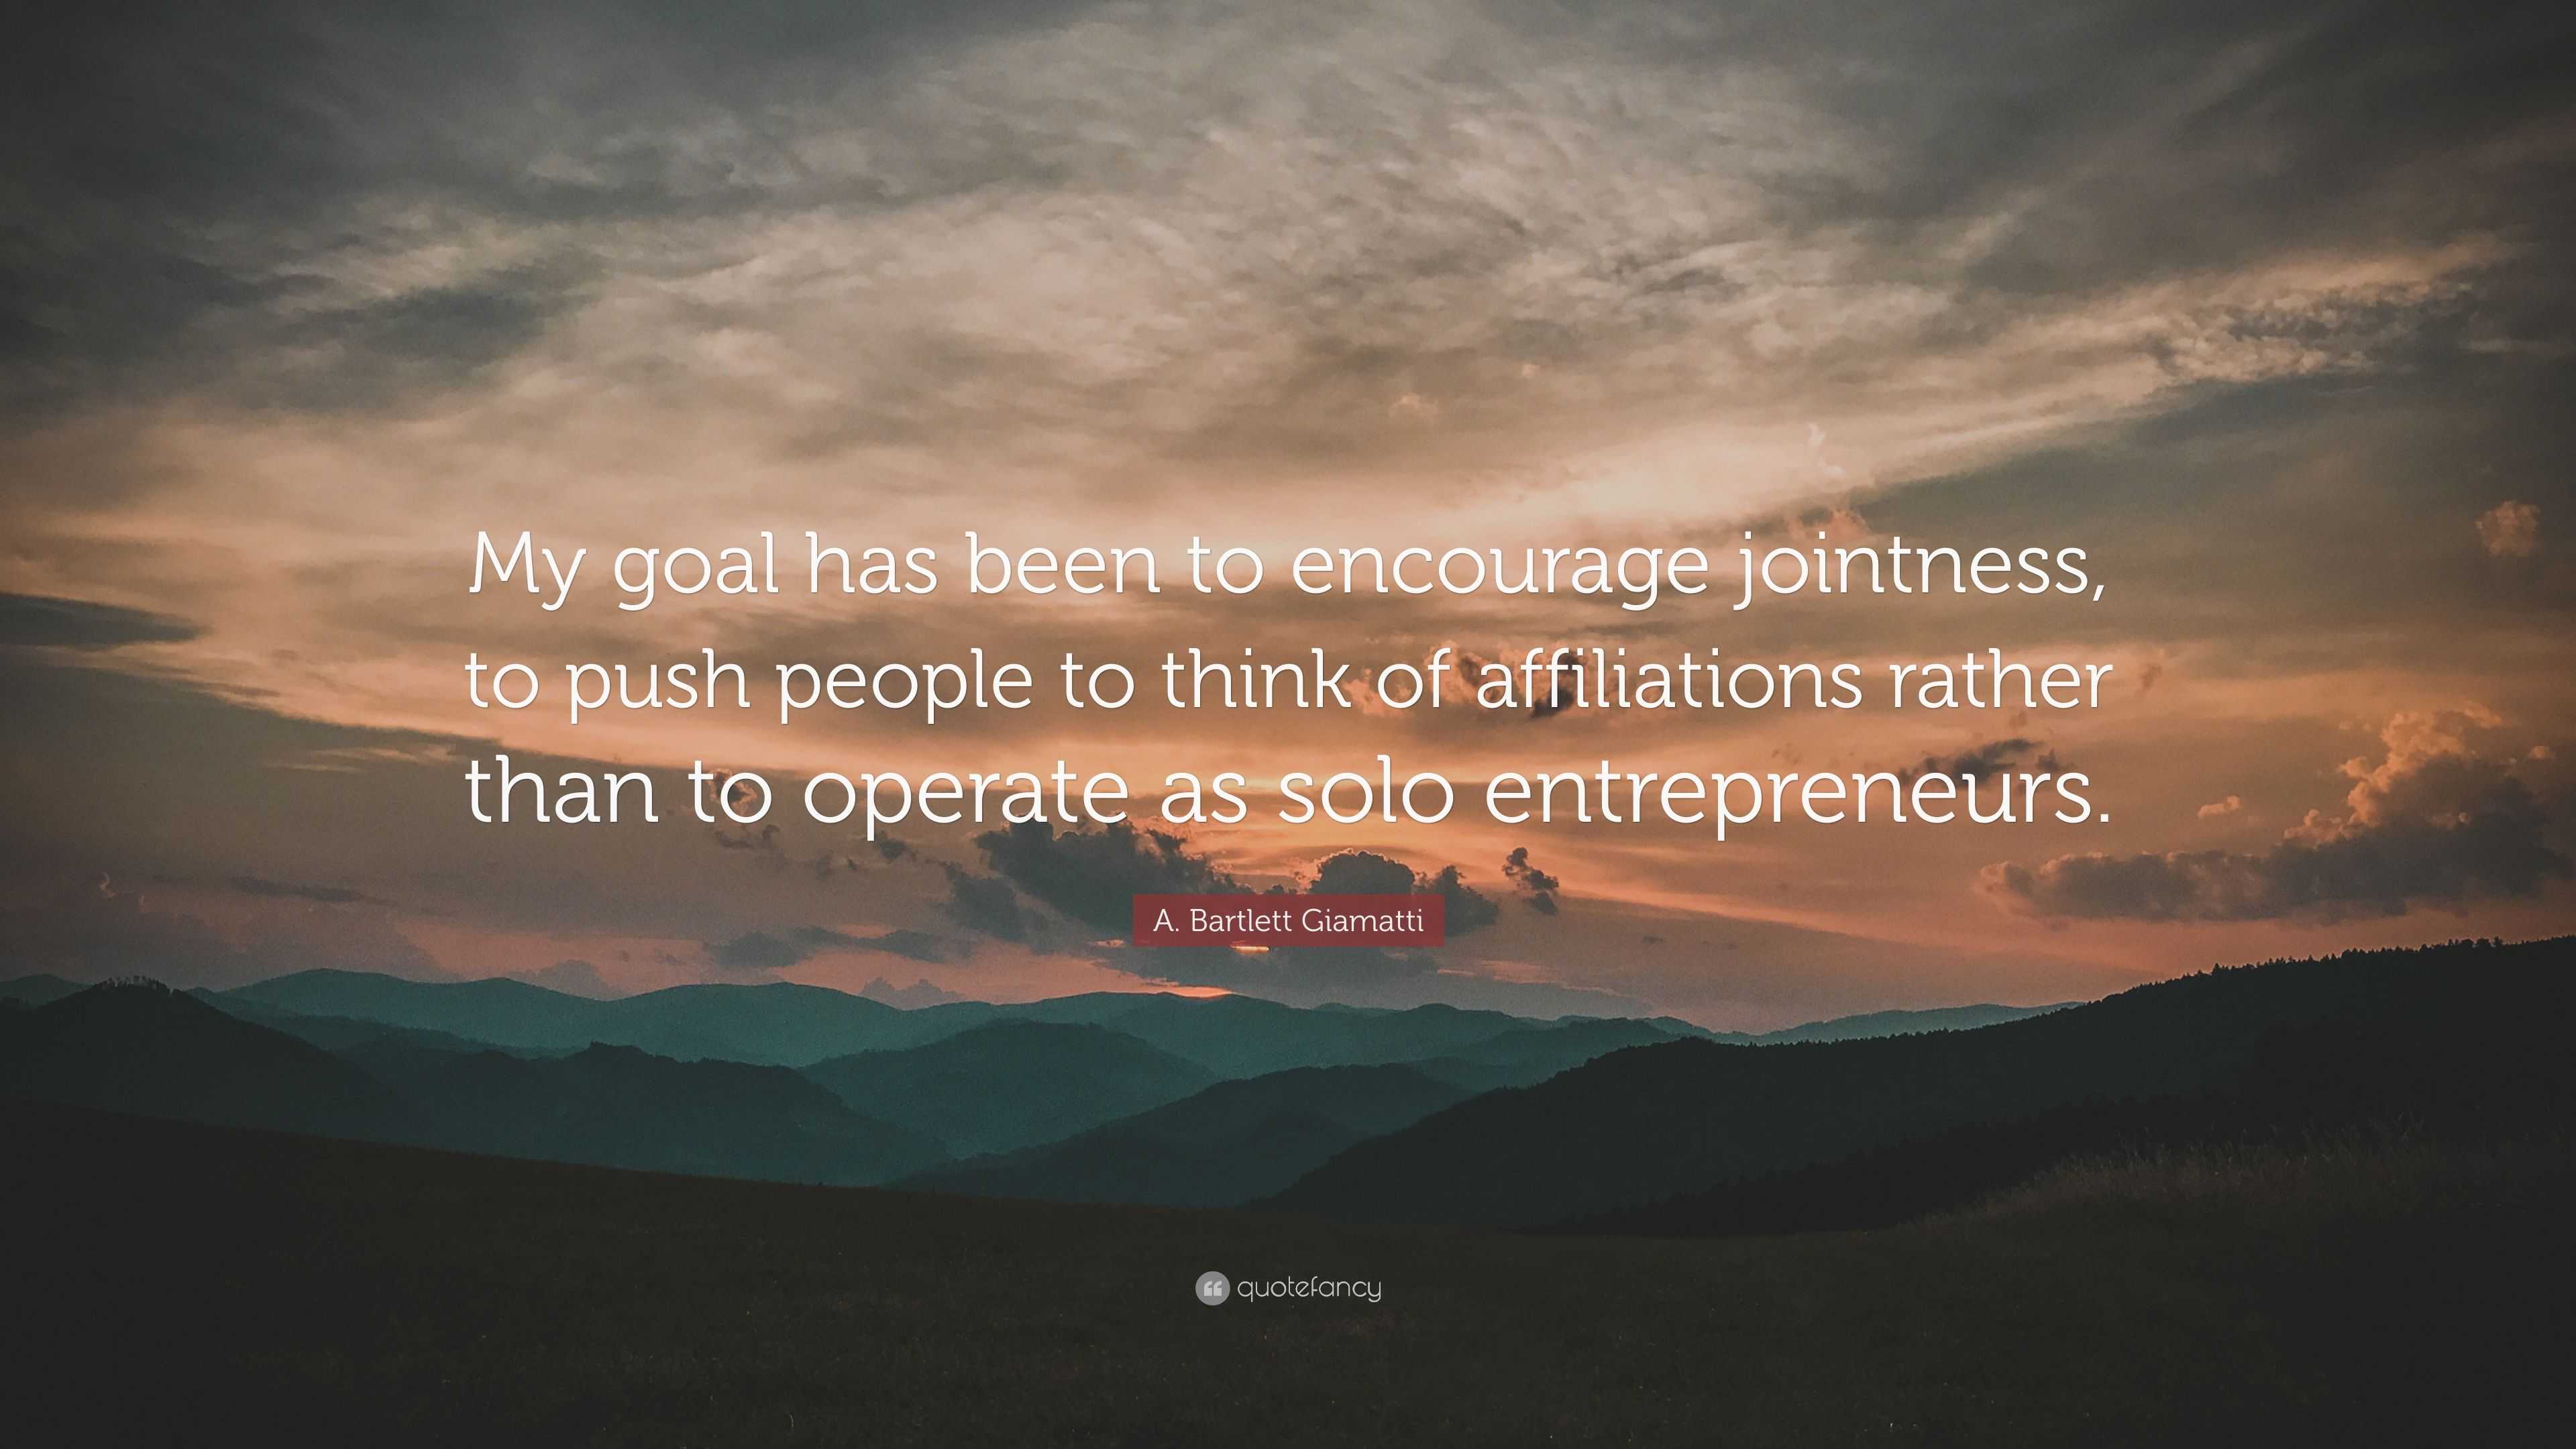 A. Bartlett Giamatti Quote: “My goal has been to encourage jointness ...